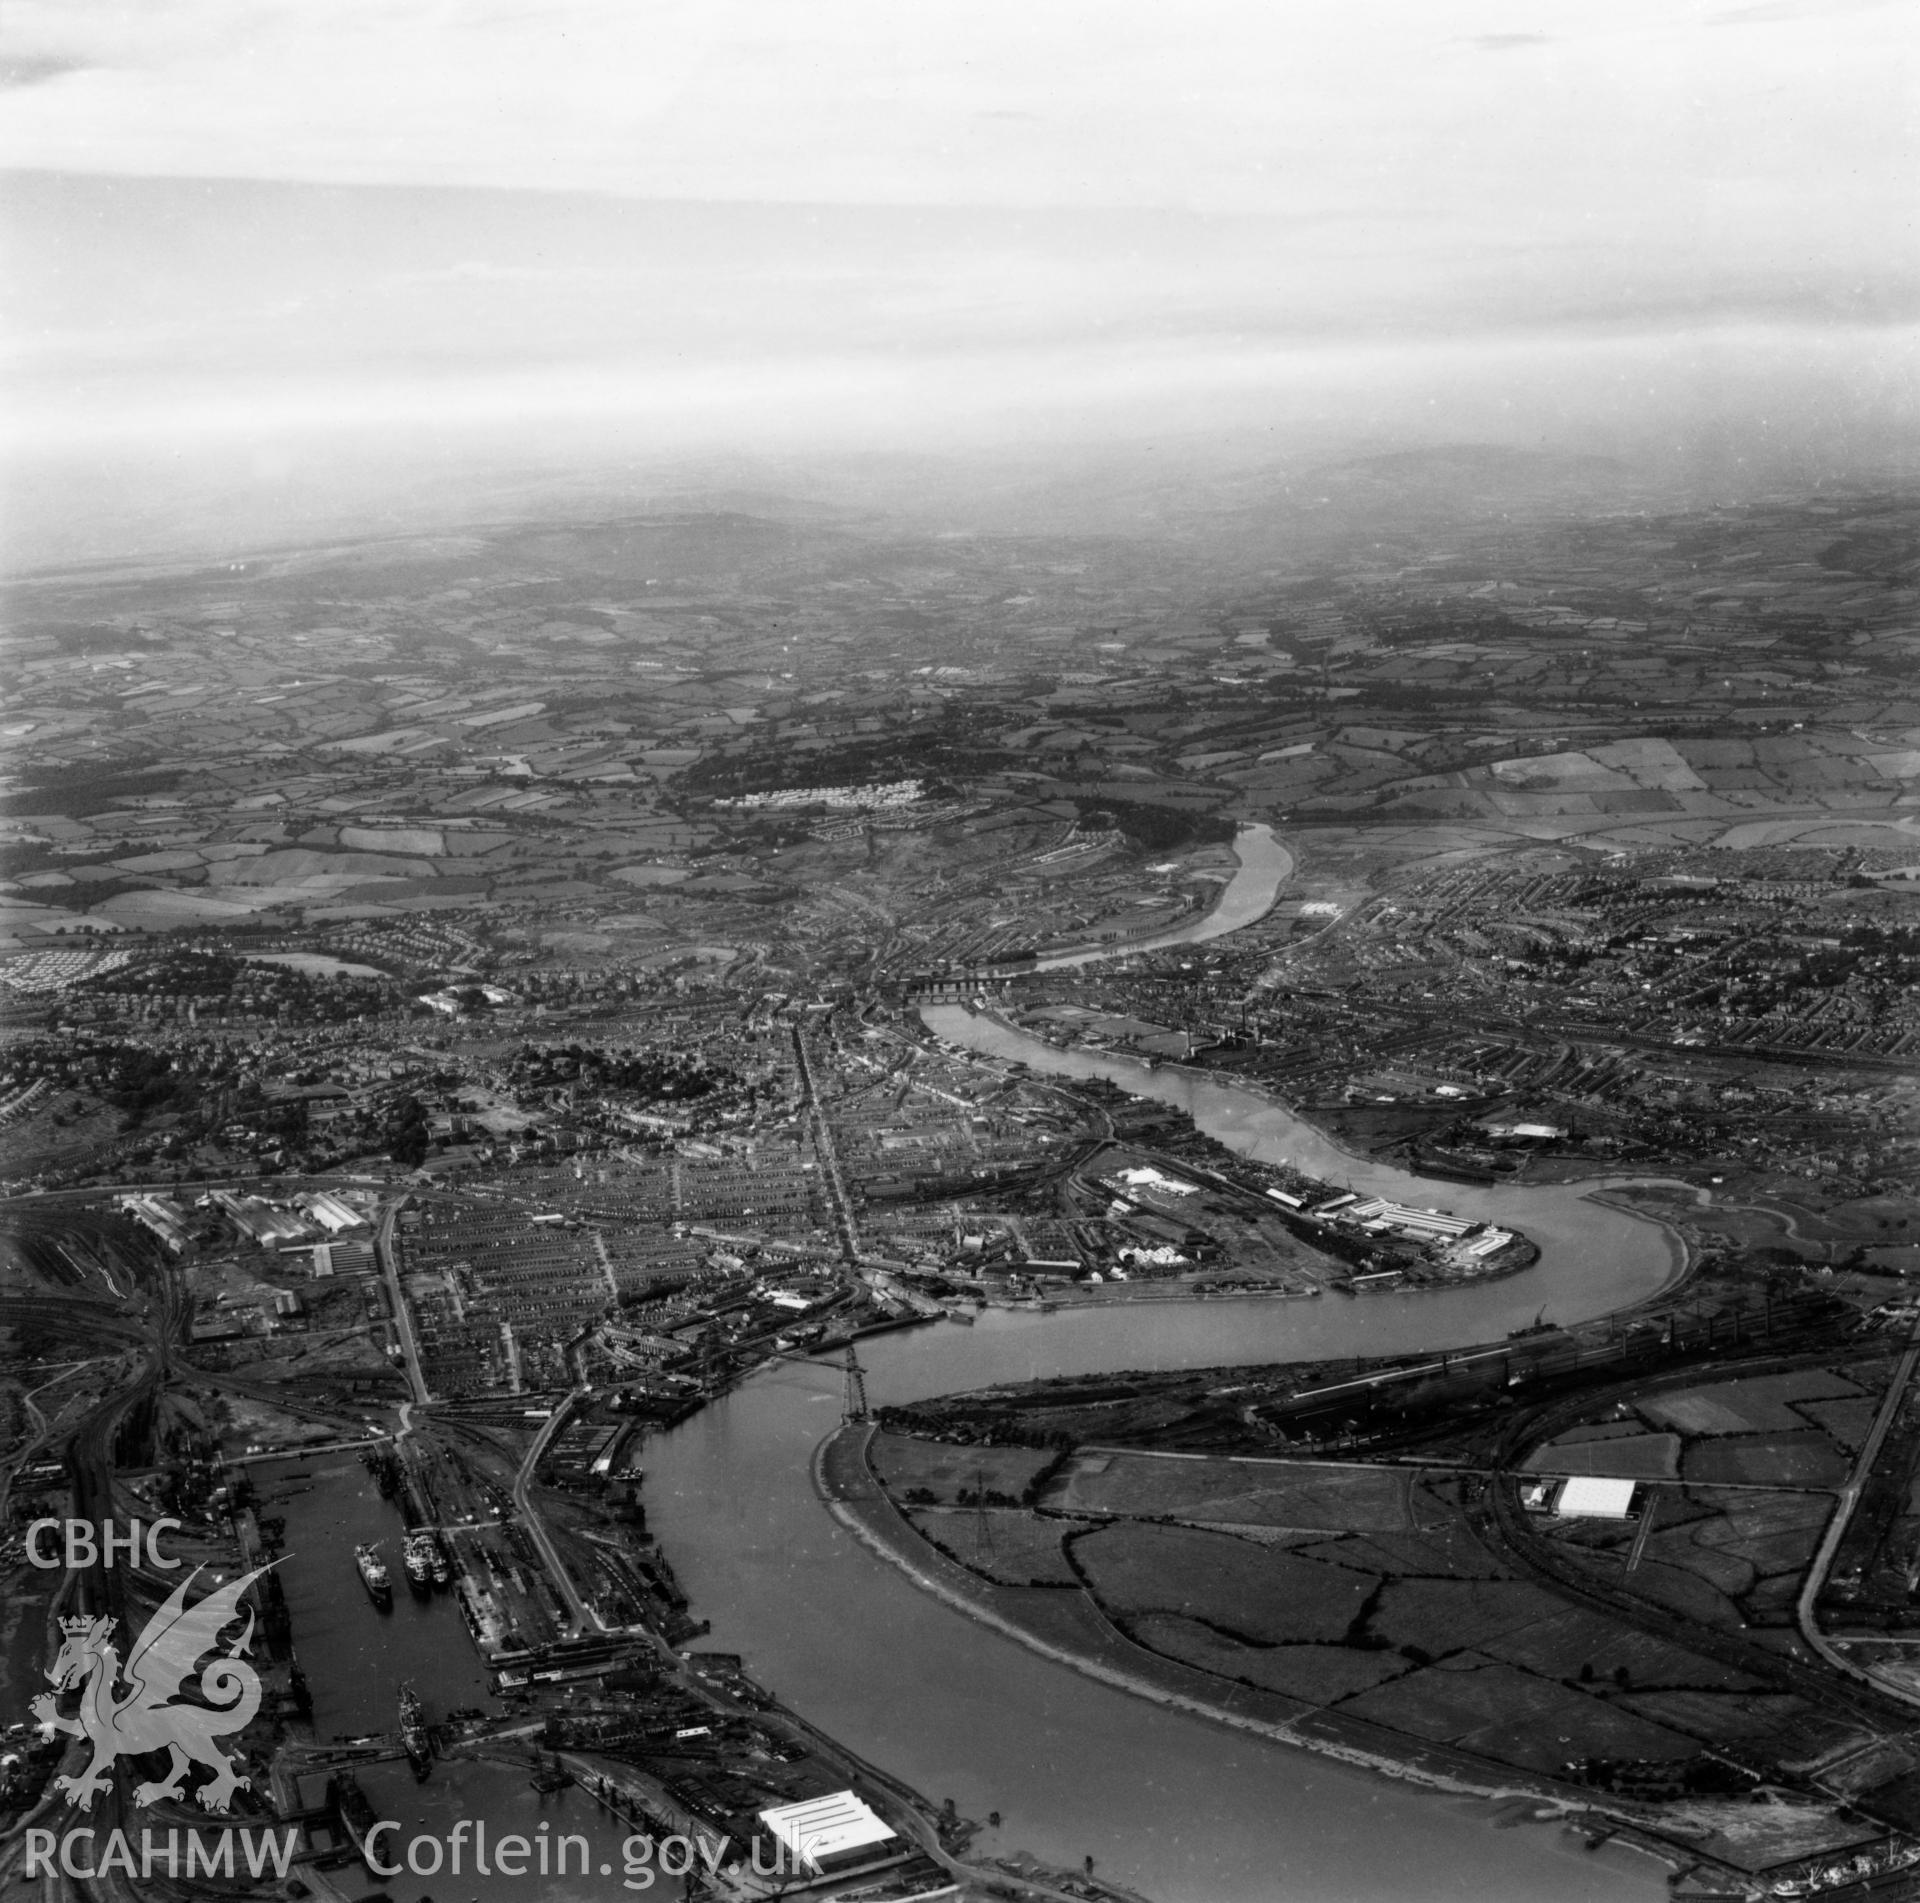 Distant view of Newport from the south. Oblique aerial photograph, 5?" cut roll film.